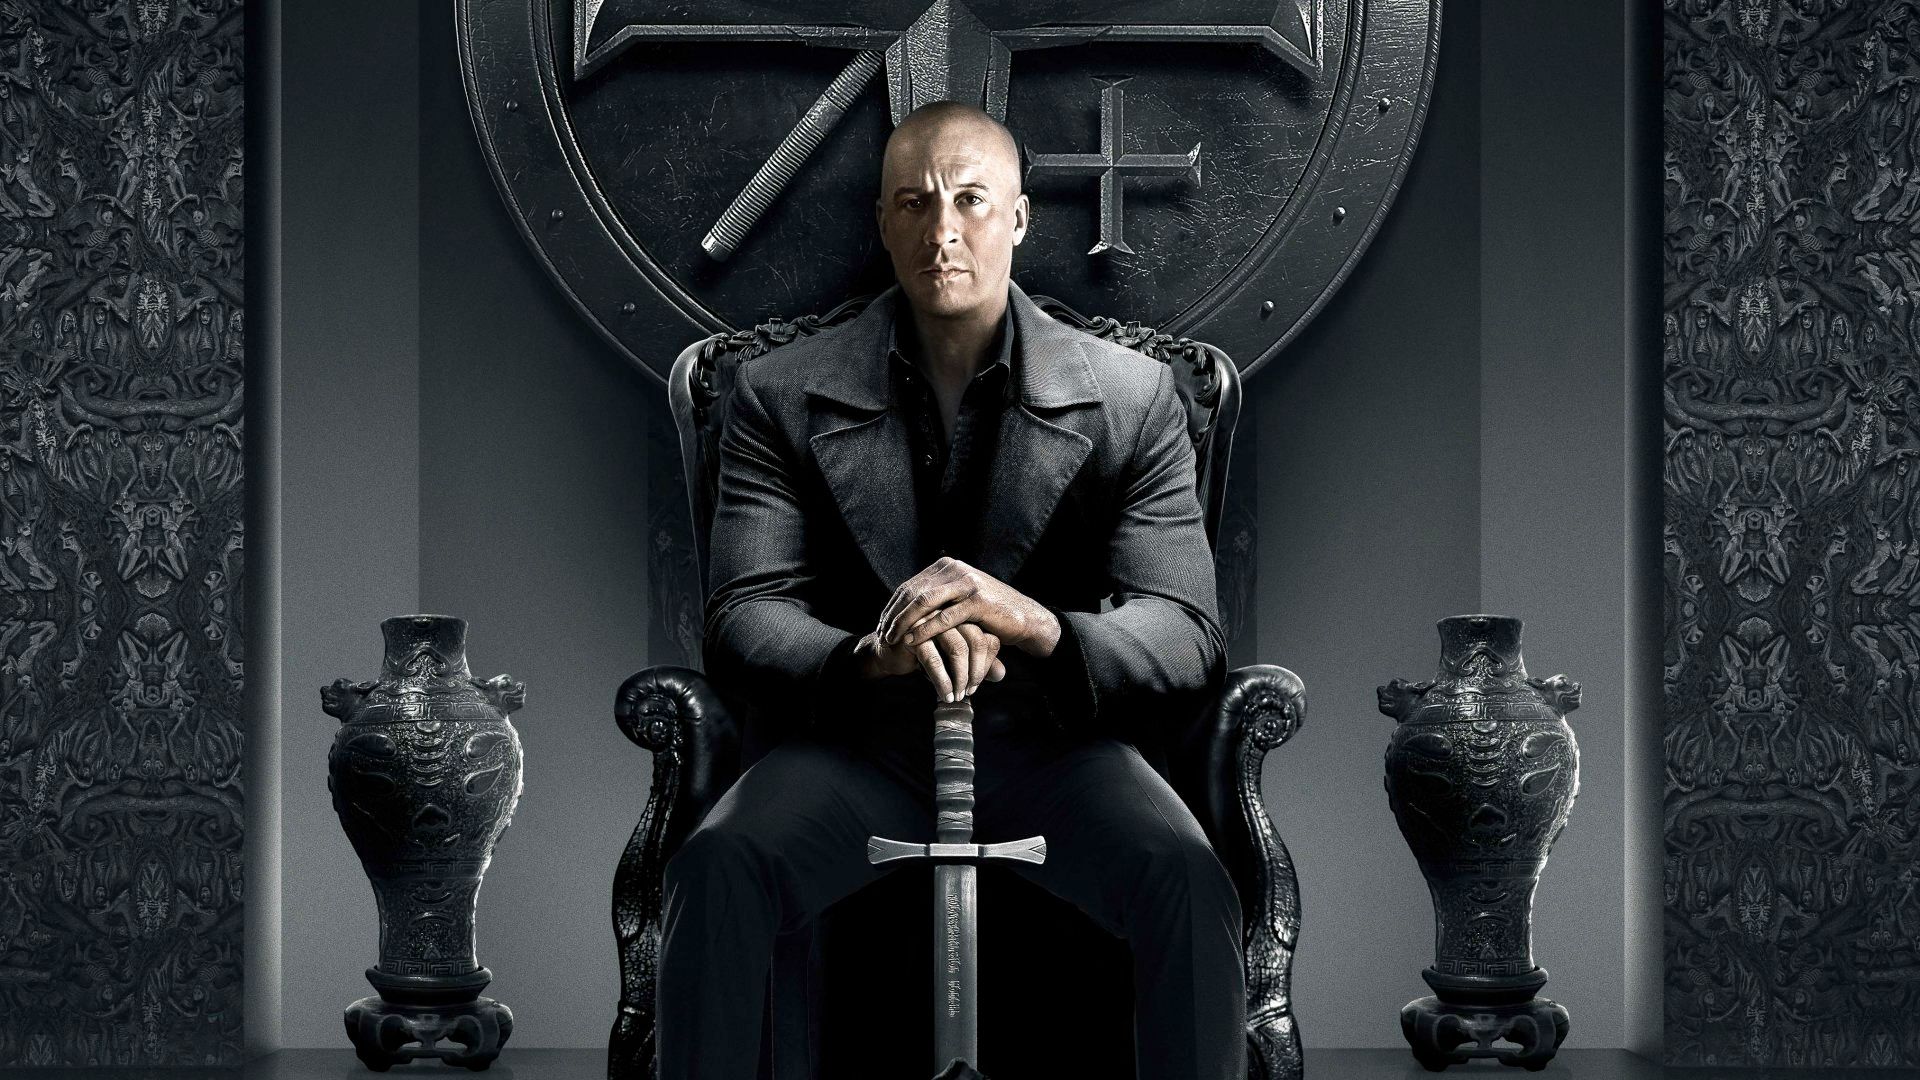 Vin Diesel on Bringing His D&D Character to Life in The Last Witch Hunter